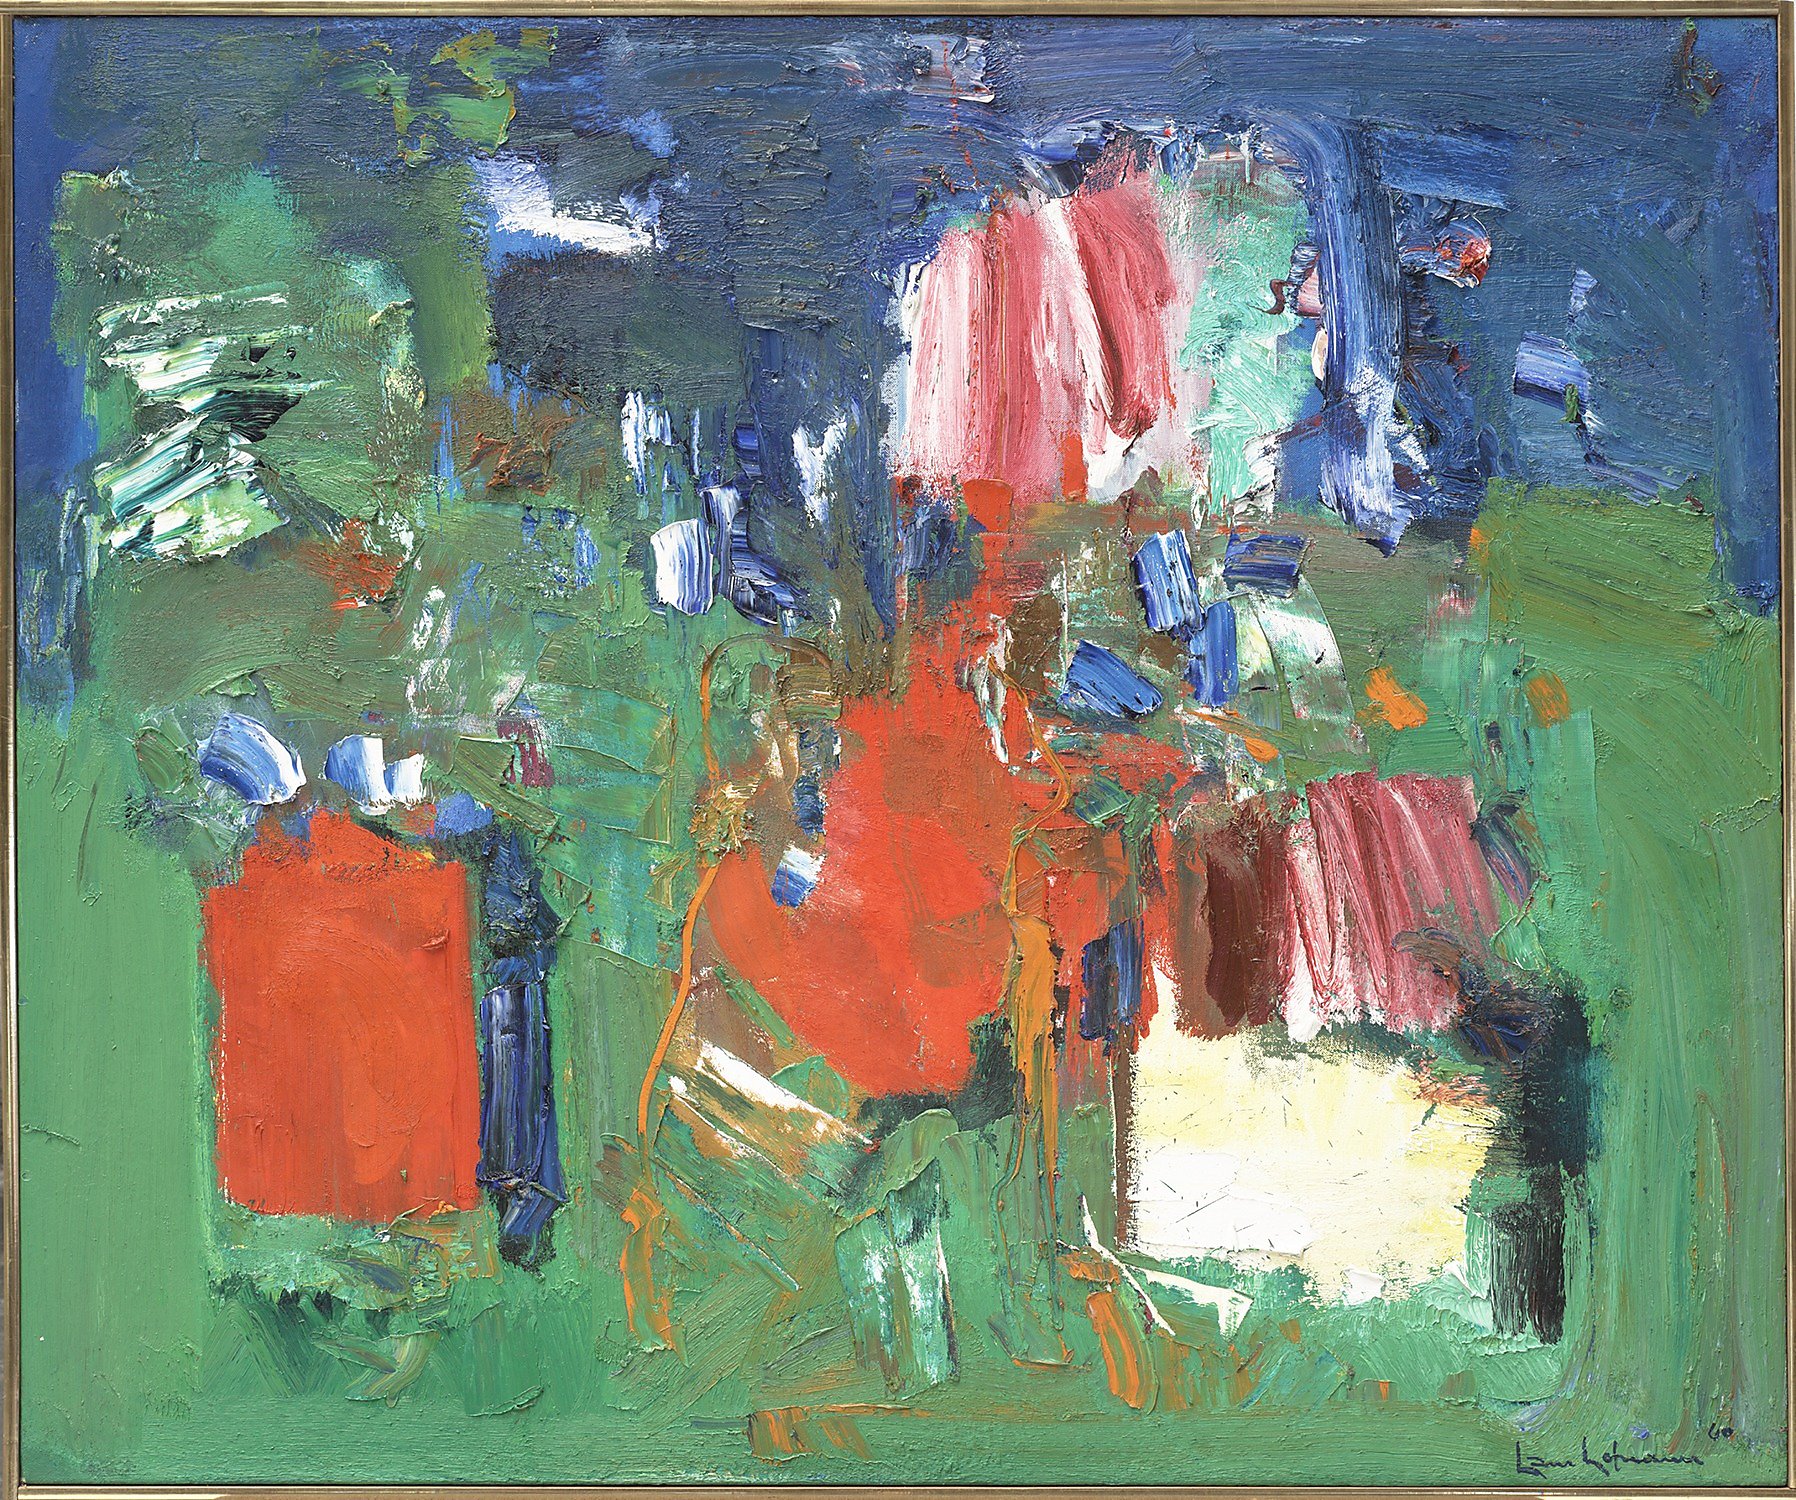 Hans Hofmann: Artist's works to be shown at Cal museum - SFGate1796 x 1500